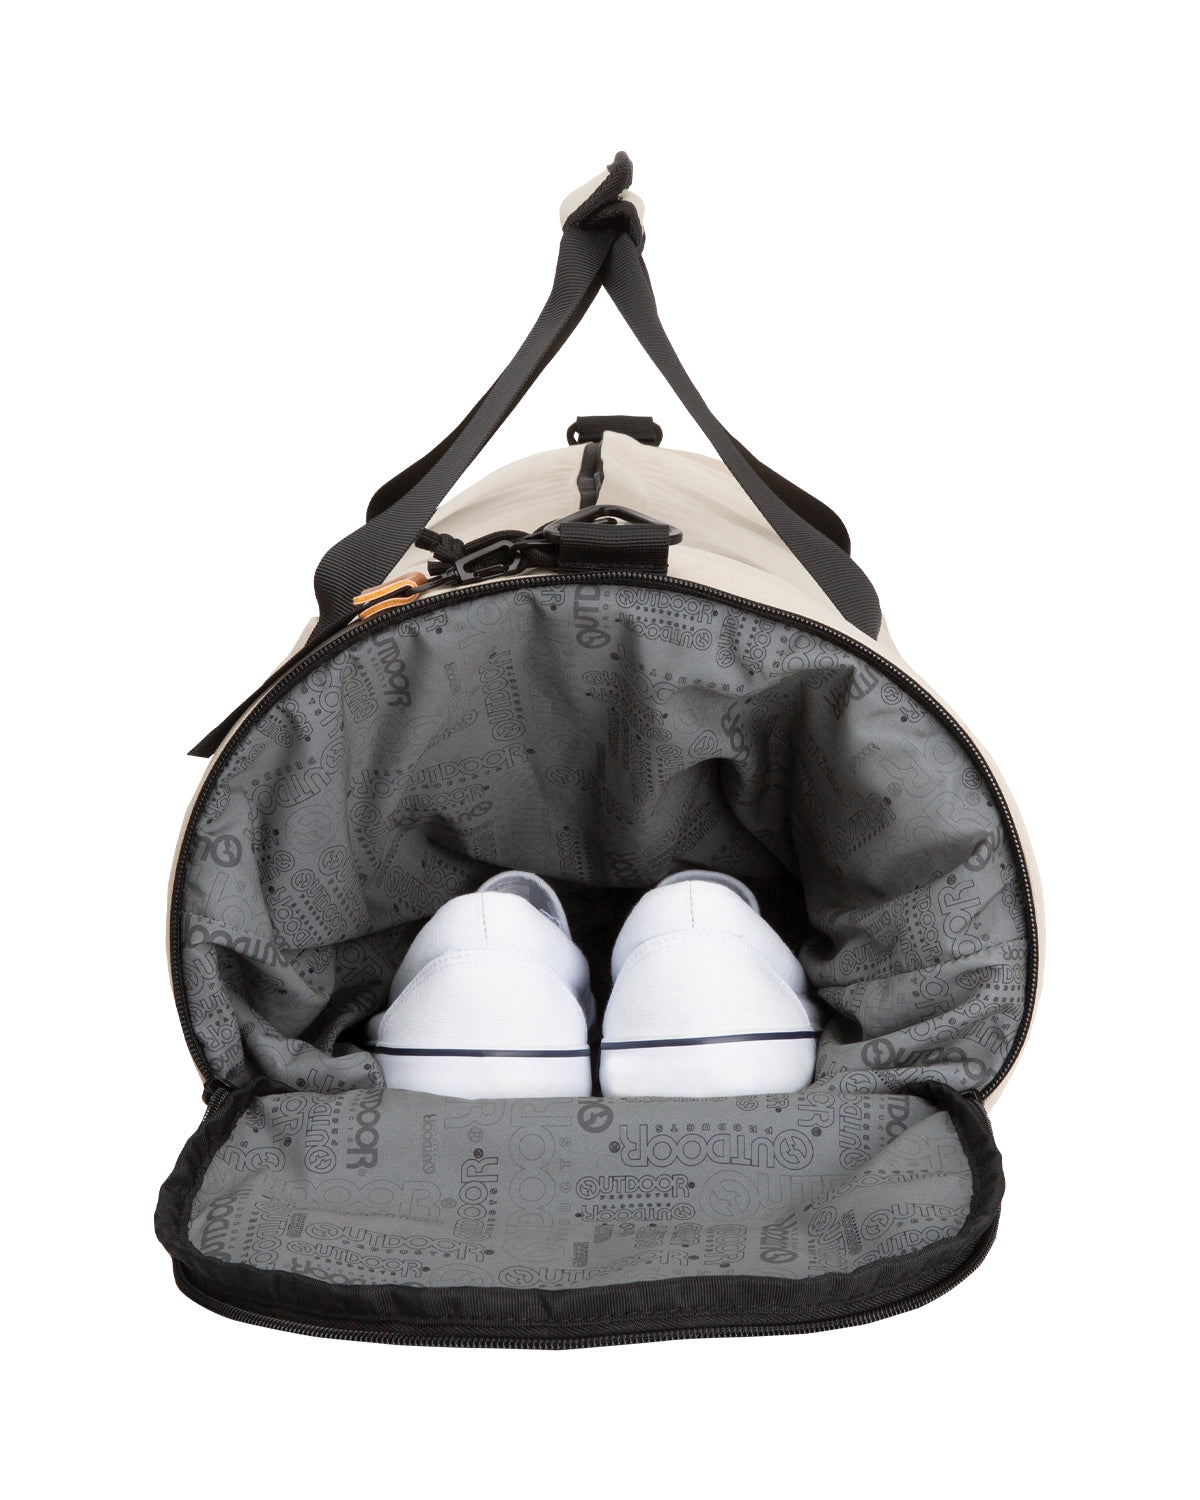 Mono Duffle Bags for Sale